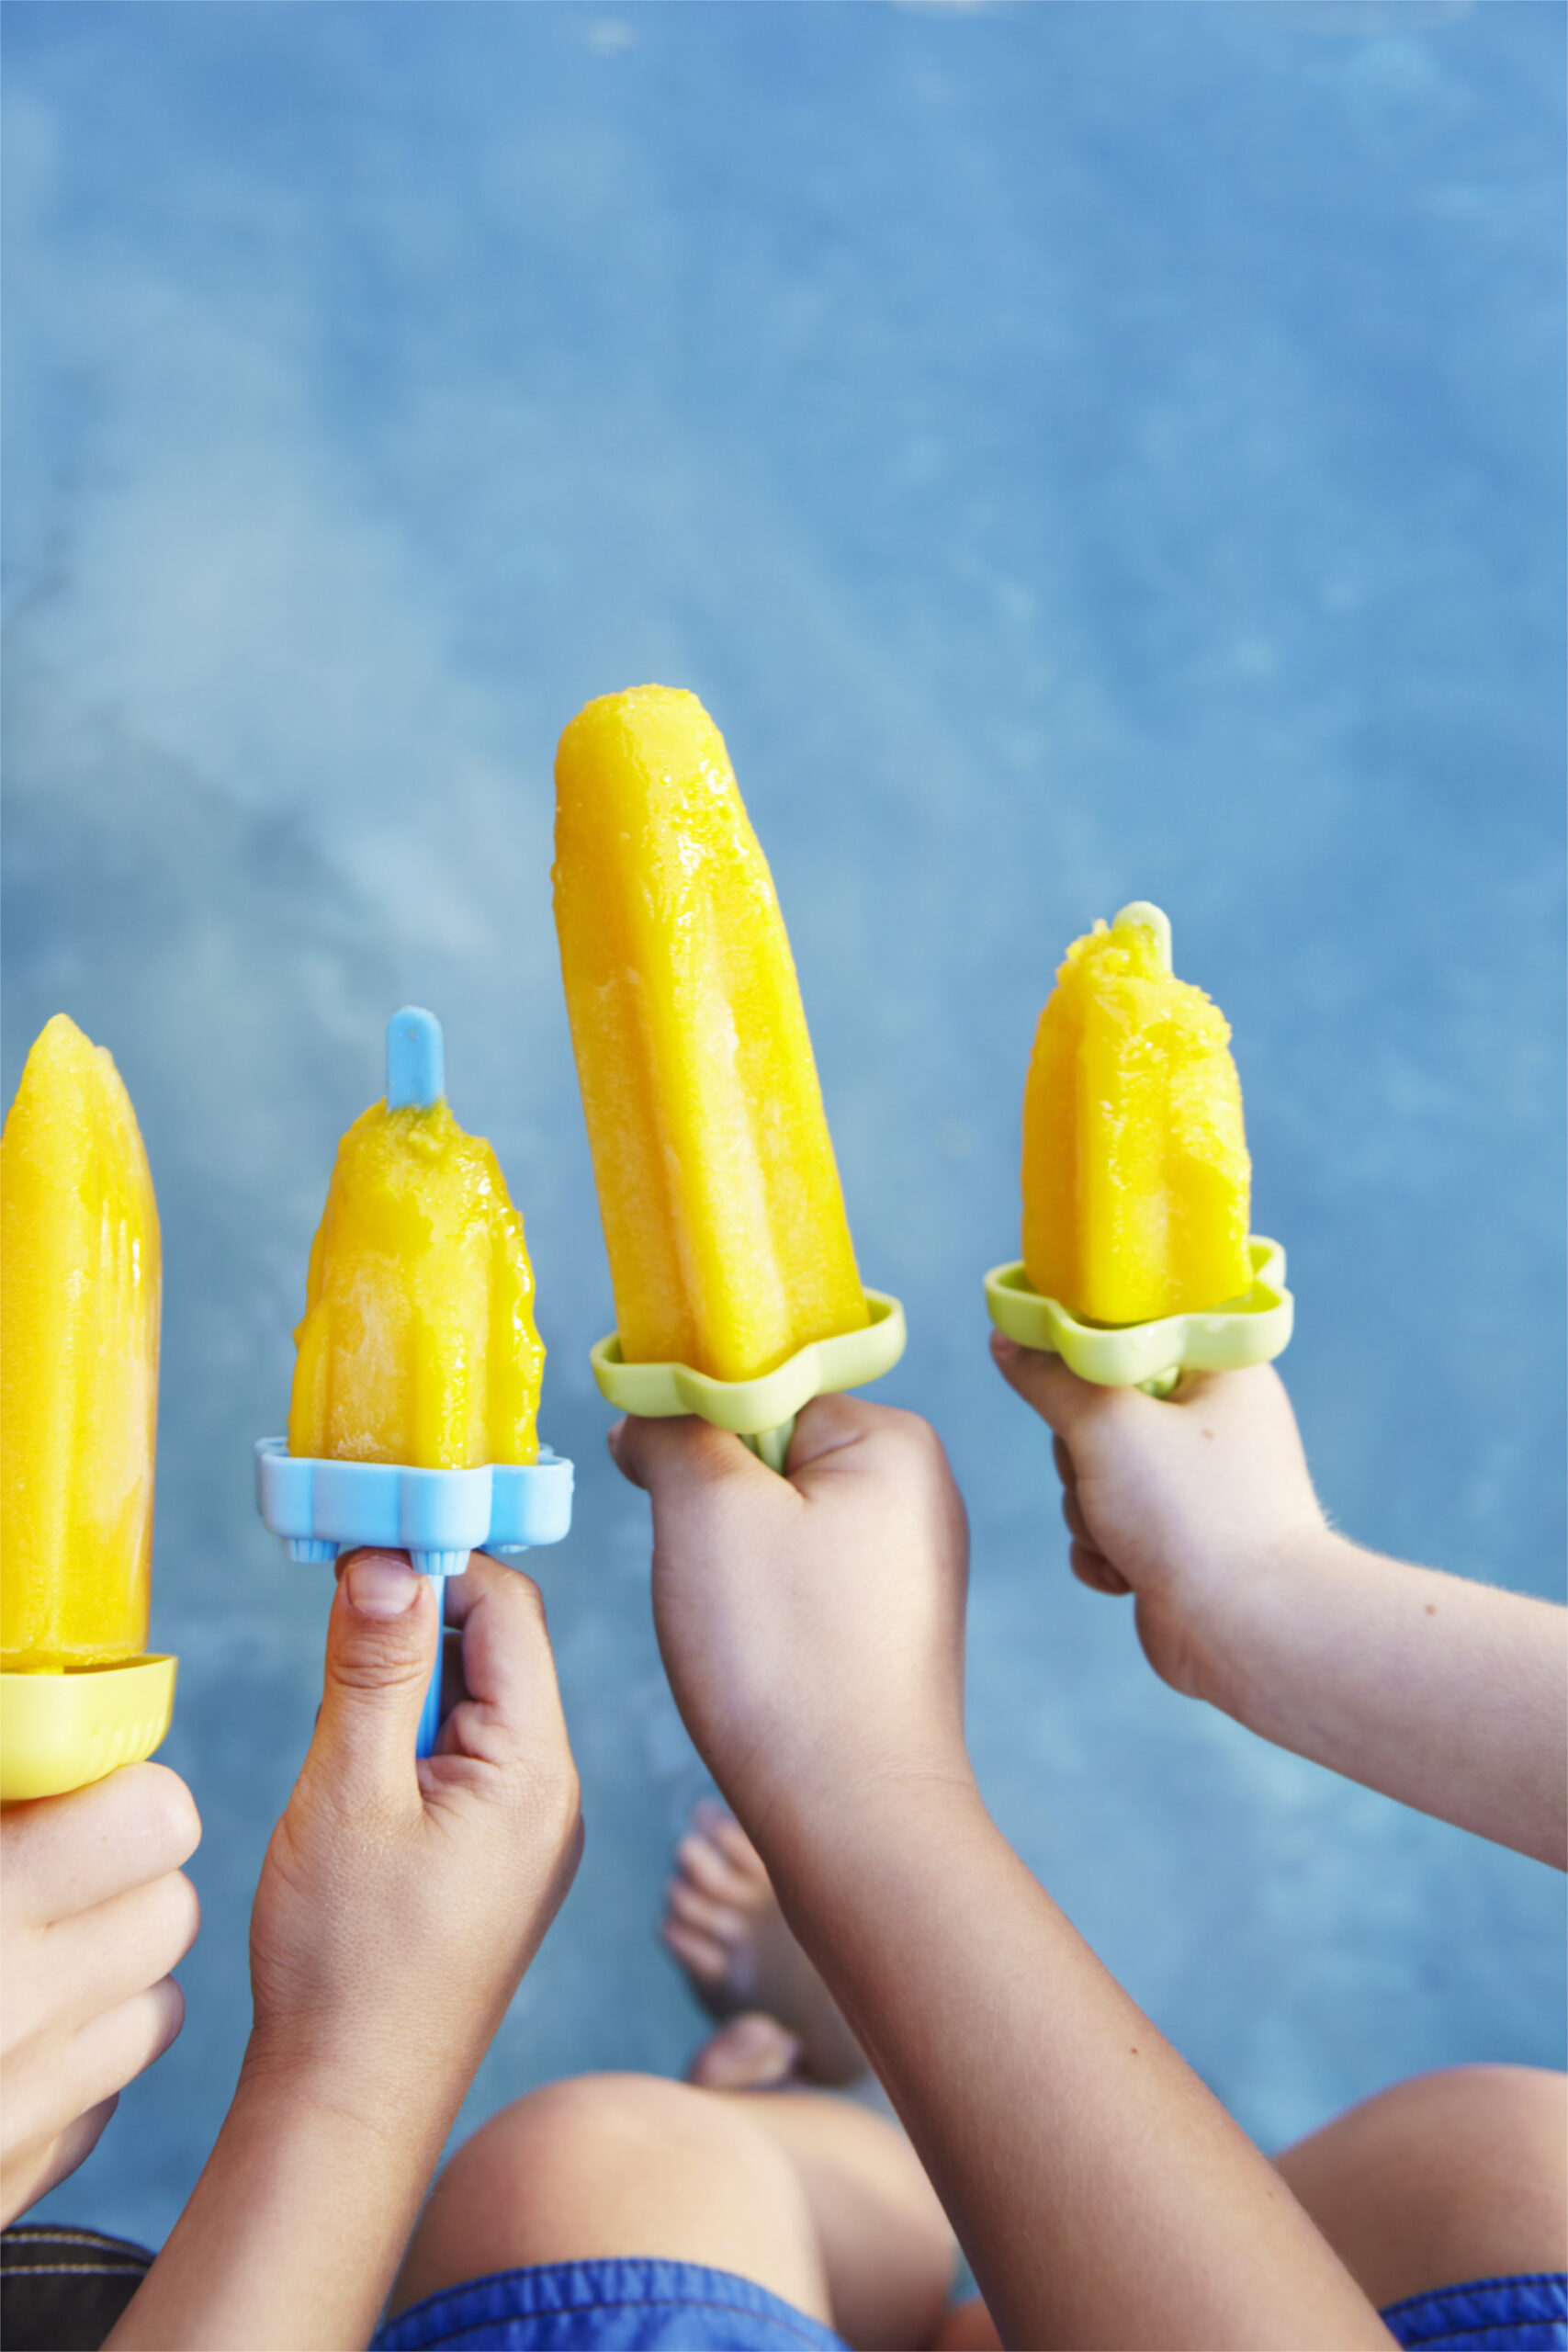 5 Tips to Beat the Summer Heat from Weelicious.com